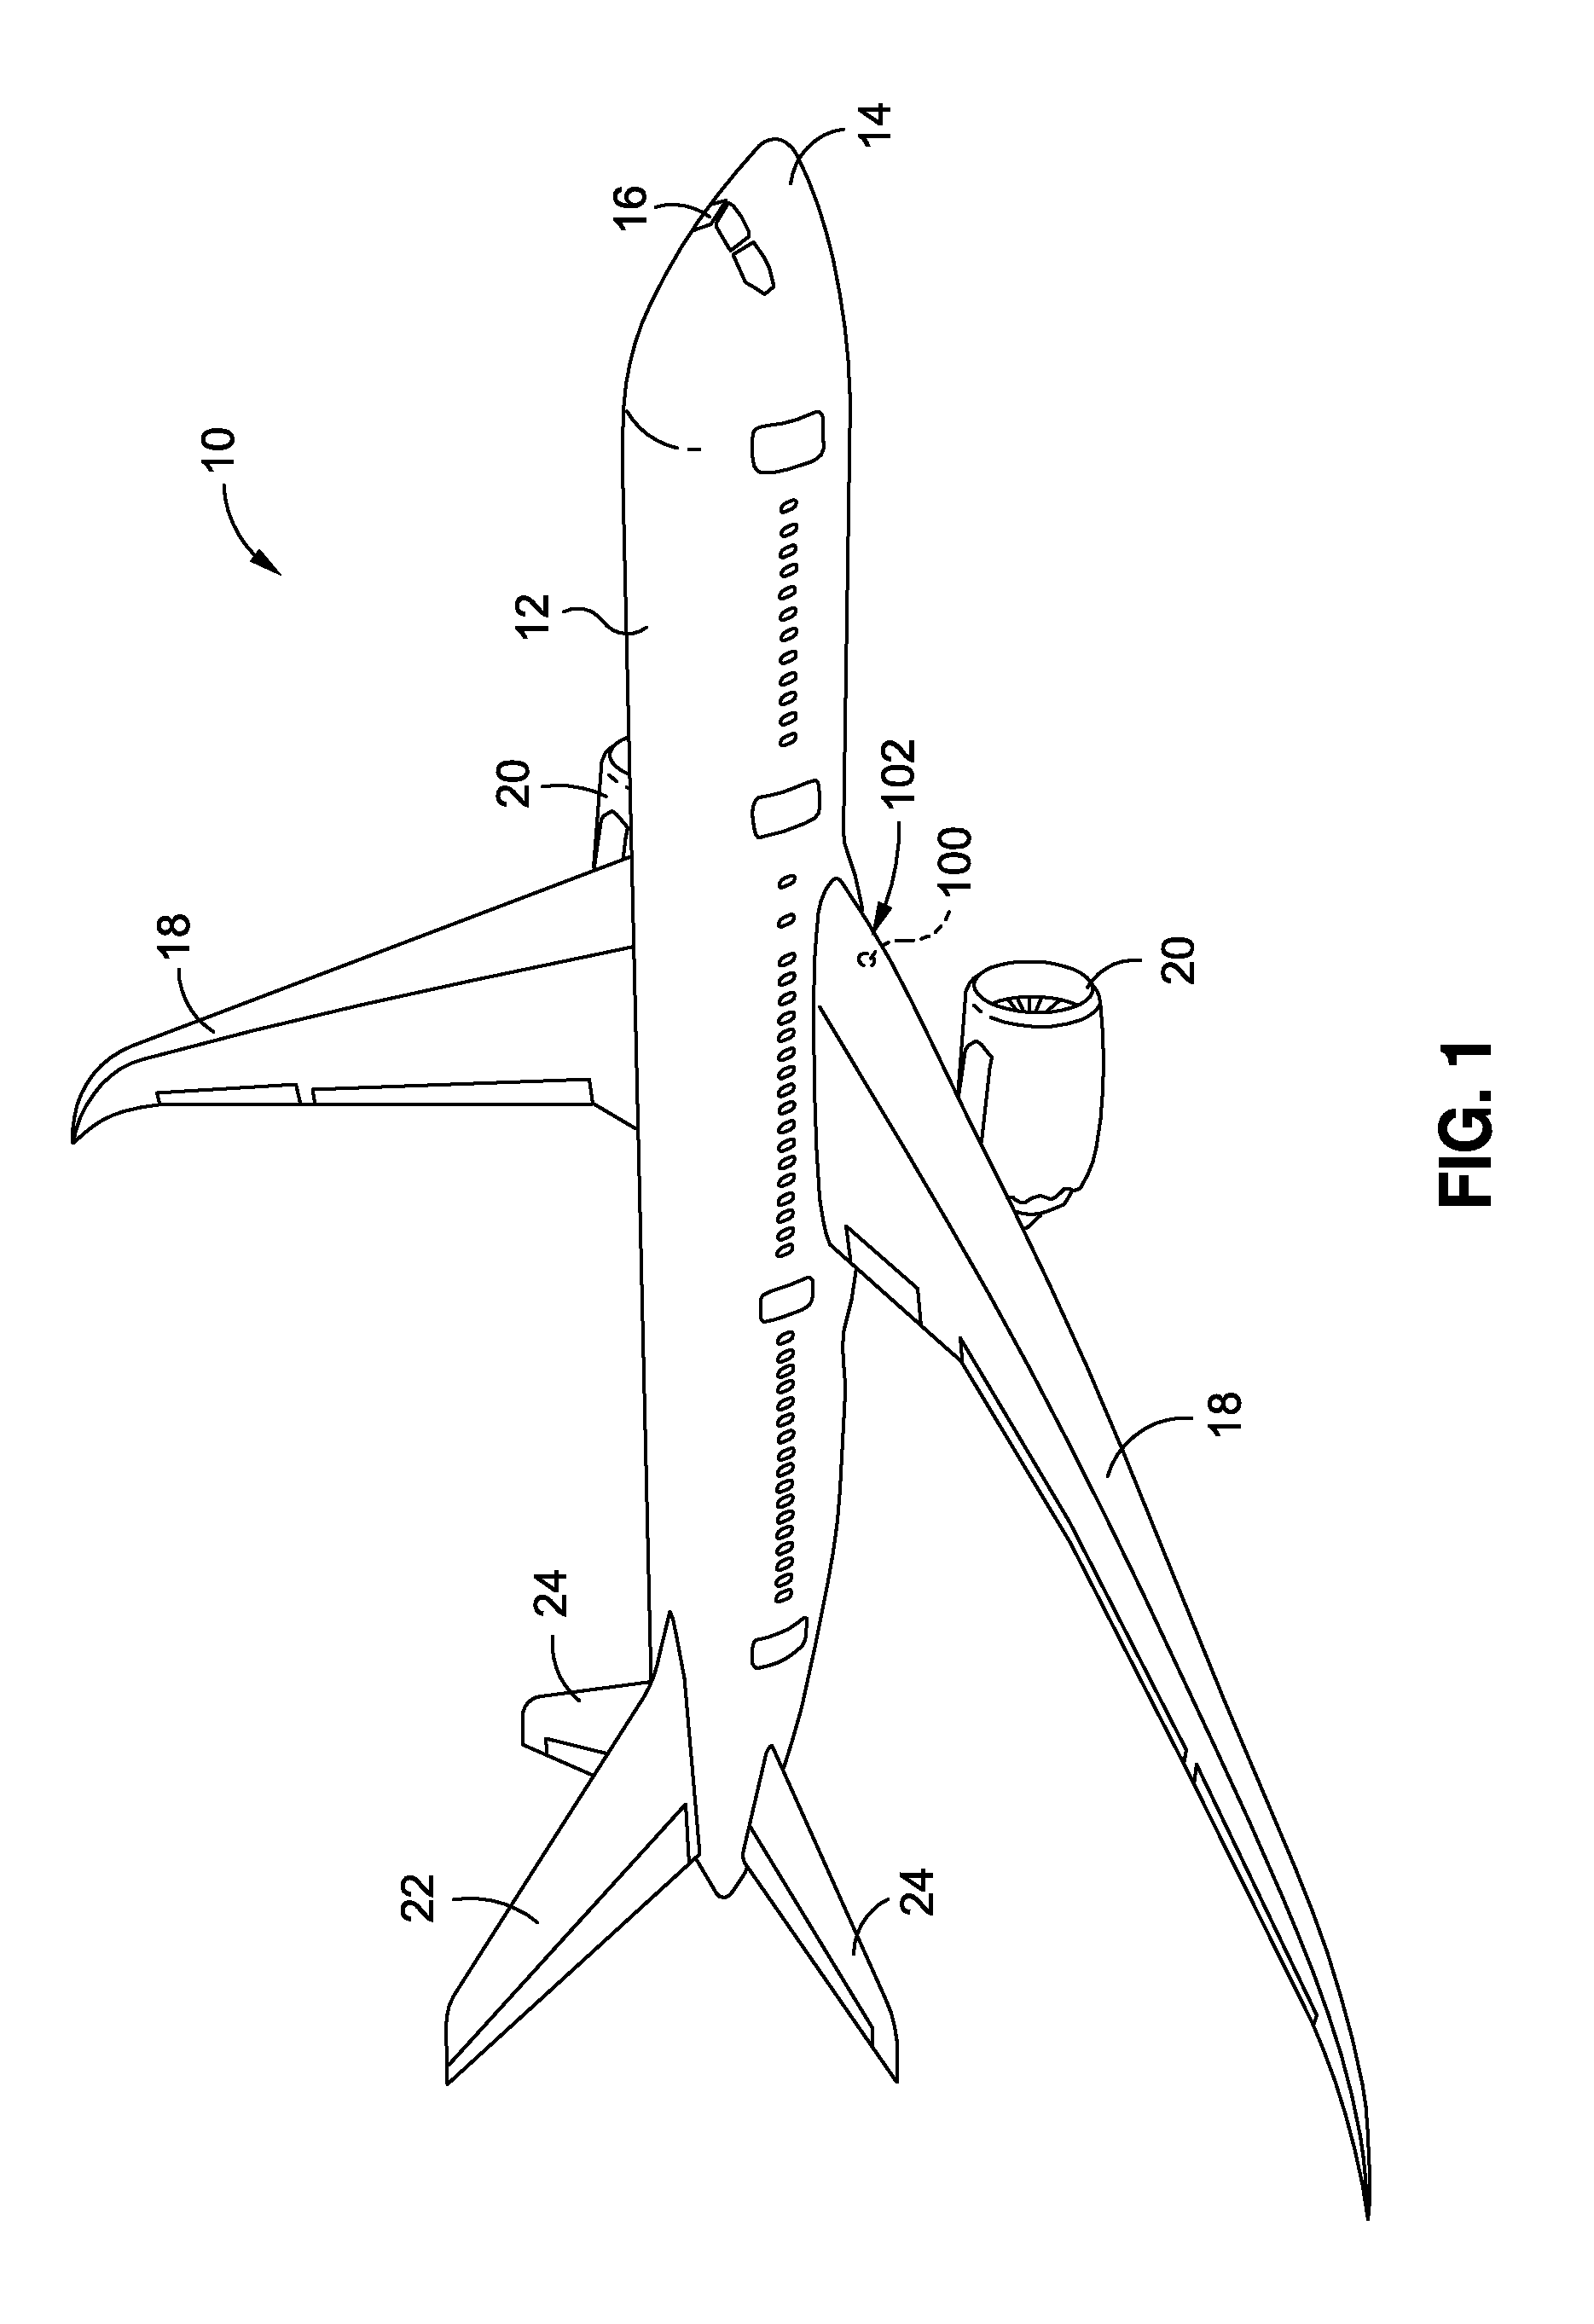 Molded-In Insert and Method for Fiber Reinforced Thermoplastic Composite Structure